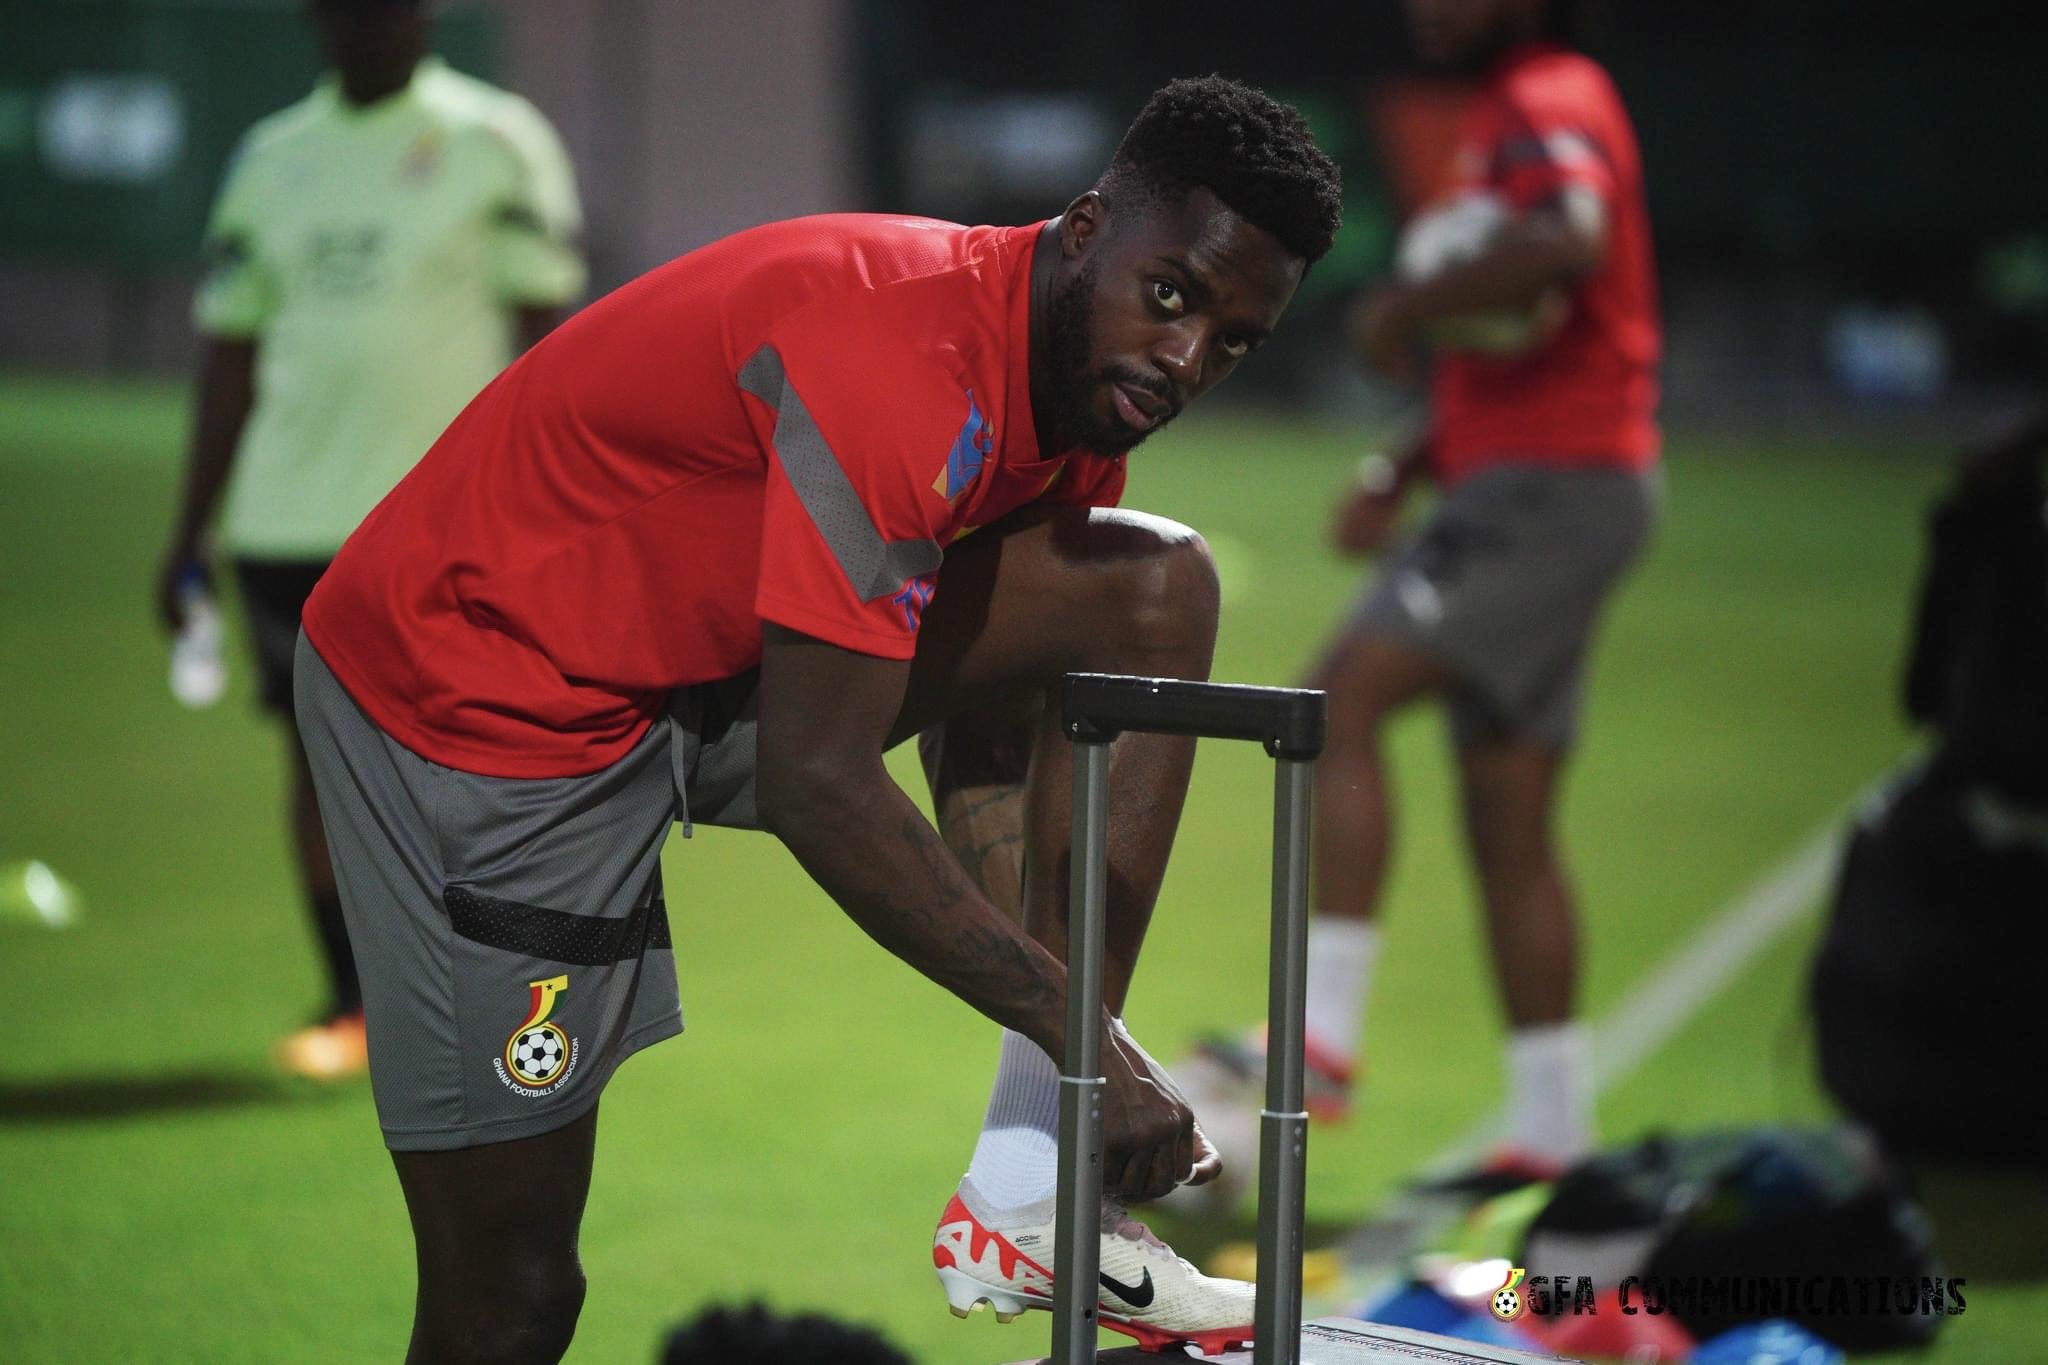 AFCON 2023: Ghana holds first training session in Ivory Coast ahead of tournament